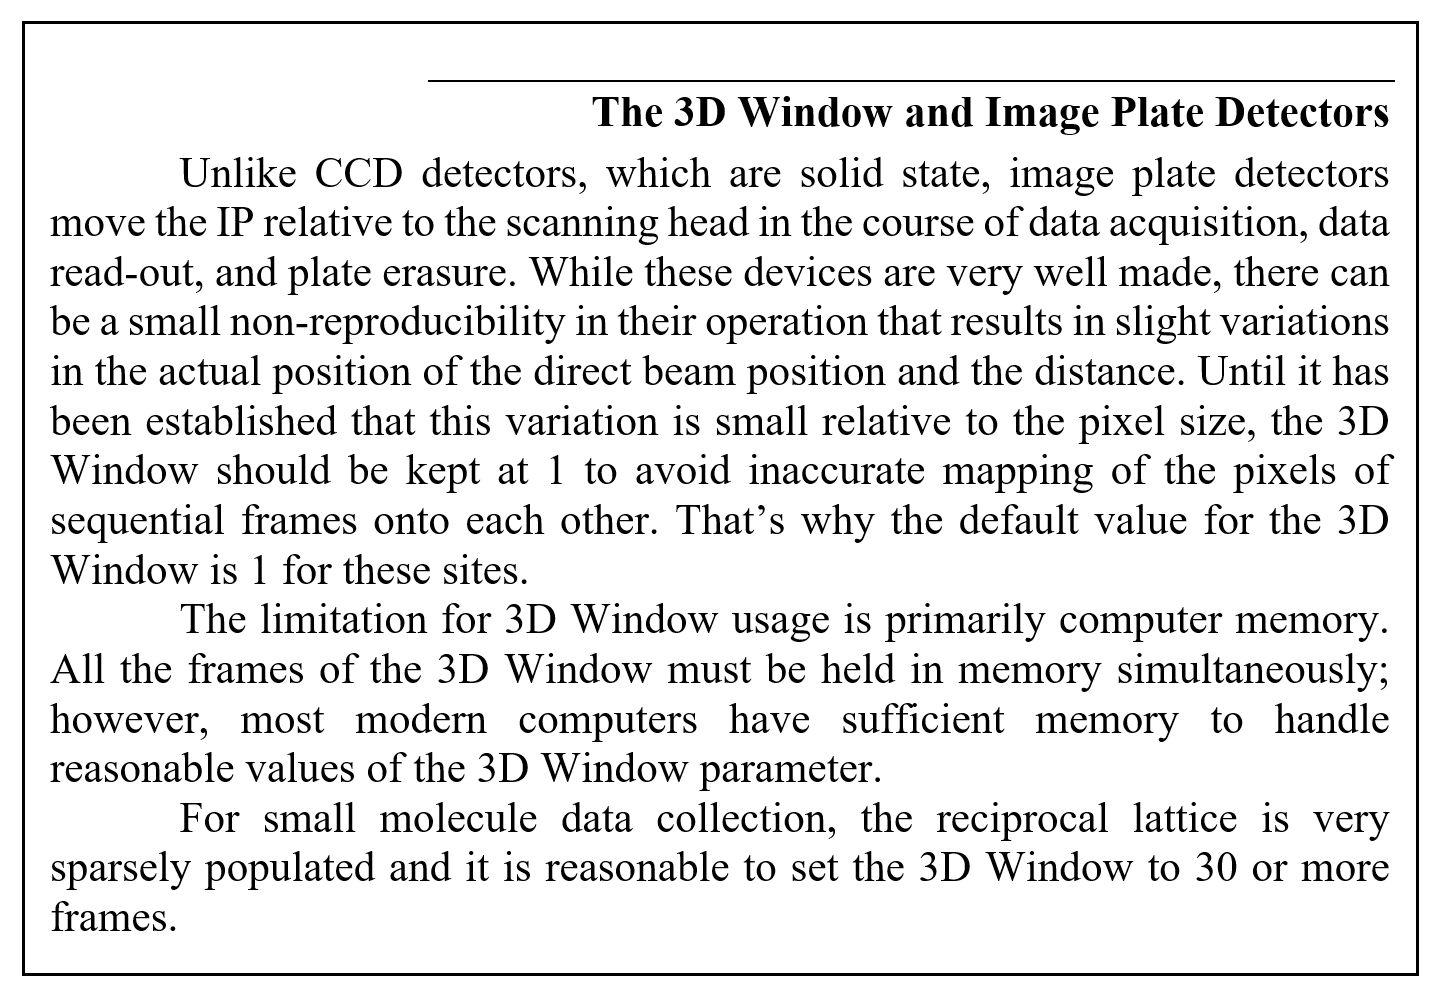 The 3D Window and Image Plate Detectors
Unlike CCD detectors, which are solid state, image plate detectors move the IP relative to the scanning head in the course of data acquisition, data read-out, and plate erasure. While these devices are very well made, there can be a small non-reproducibility in their operation that results in slight variations in the actual position of the direct beam position and the distance. Until it has been established that this variation is small relative to the pixel size, the 3D Window should be kept at 1 to avoid inaccurate mapping of the pixels of sequential frames onto each other. That's why the default value for the 3D Window is 1 for these sites.
The limitation for 3D Window usage is primarily computer memory. All the frames of the 3D Window must be held in memory simultaneously; however, most modern computers have sufficient memory to handle reasonable values of the 3D Window parameter. 
For small molecule data collection, the reciprocal lattice is very sparsely populated and it is reasonable to set the 3D Window to 30 or more frames.
